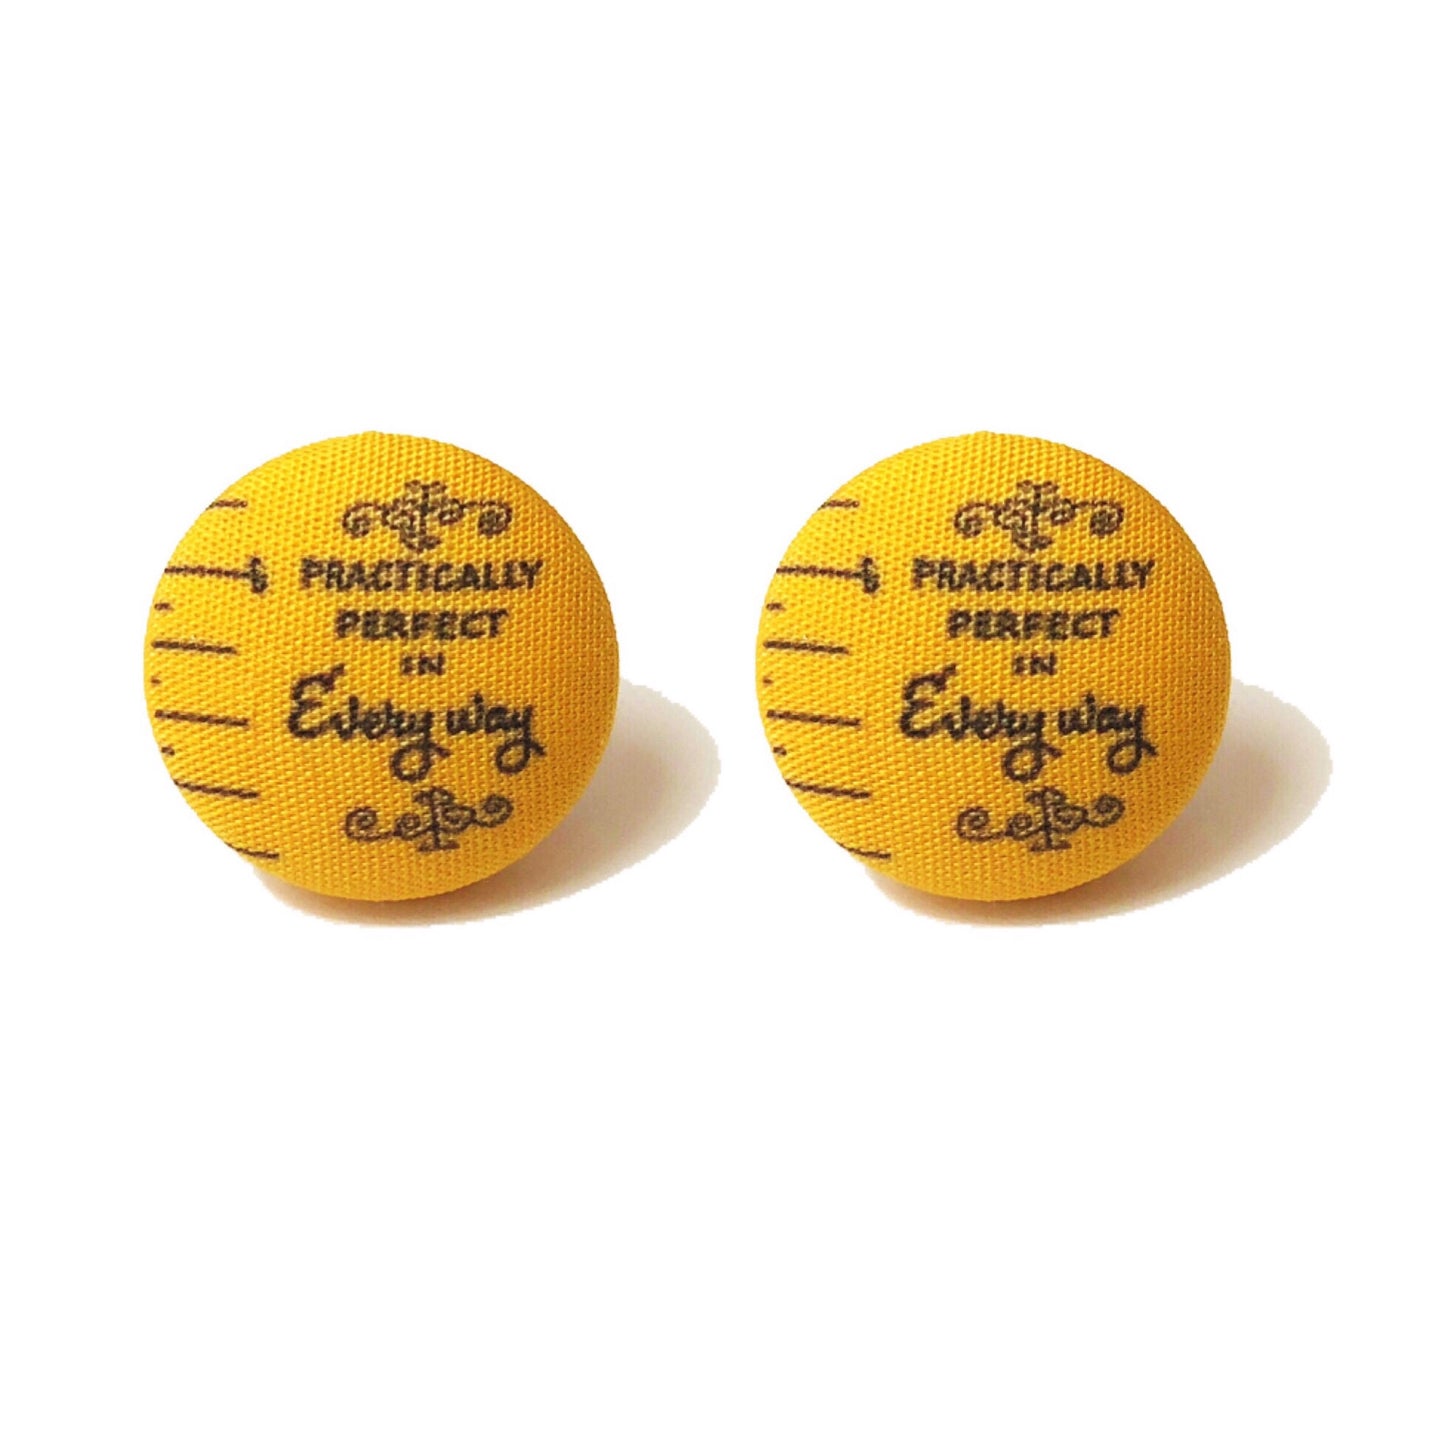 Practically Perfect in Every Way Fabric Button Earrings